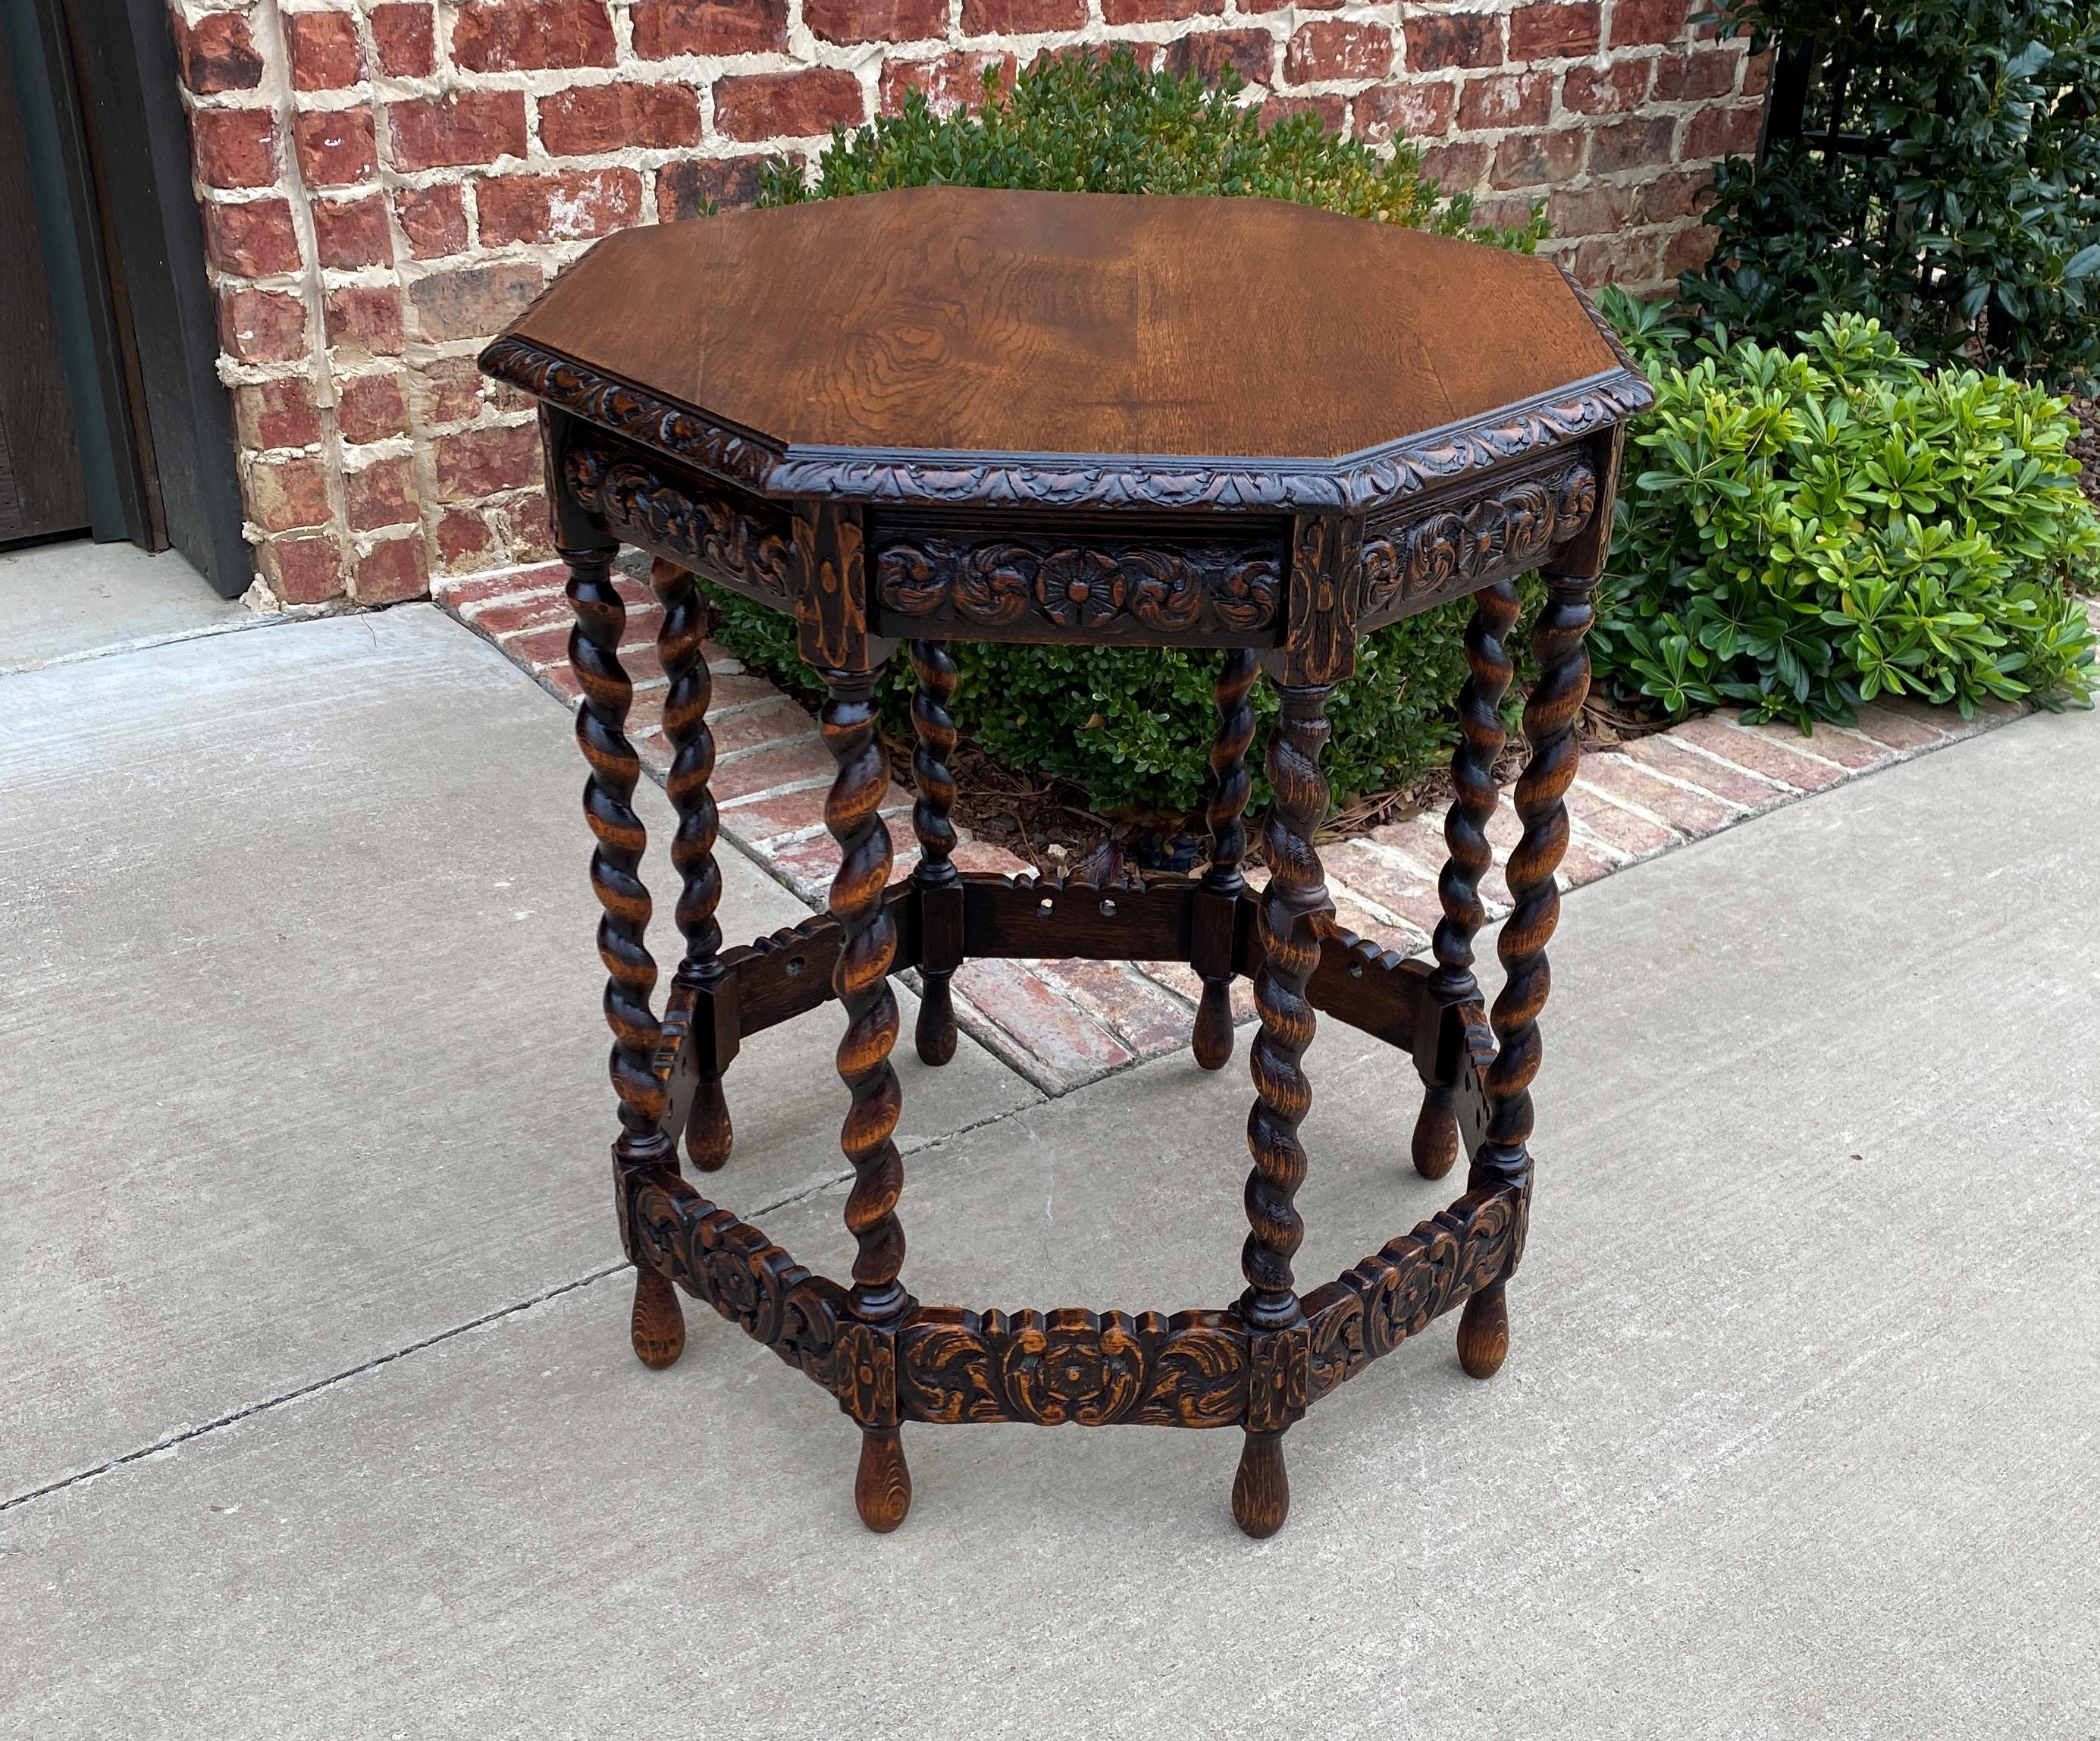 Highly carved antique French oak octagonal barley twist entry, hall, sofa, center, parlor or end table ~~Victorian Era Renaissance Revival
~~c. 1900

These versatile tables were very popular in late Victorian era French country homes and